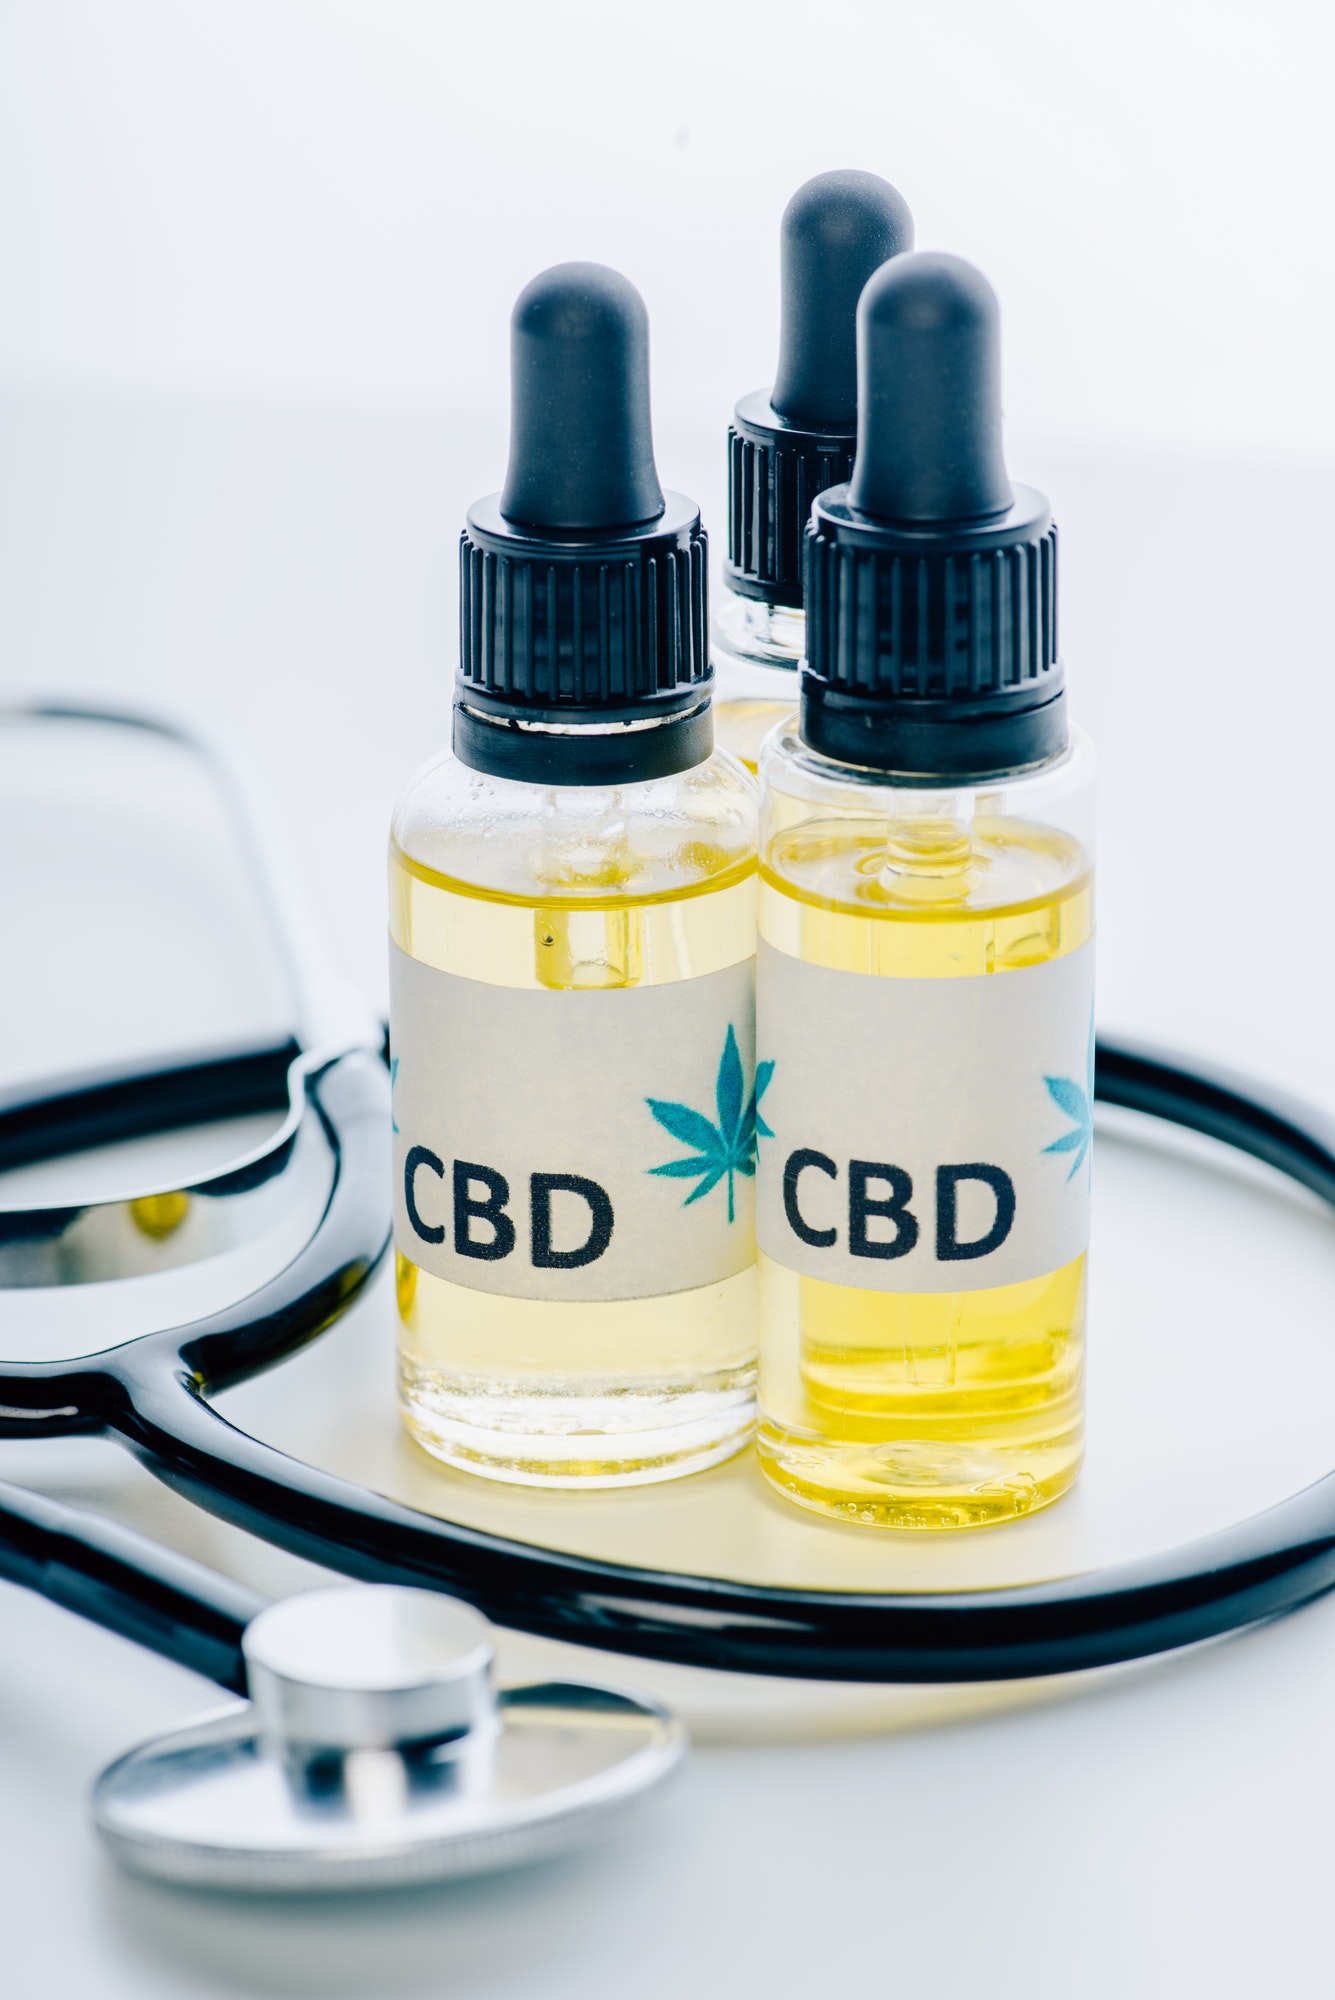 cannabis oil in bottles with lettering cbd and stethoscope on white background